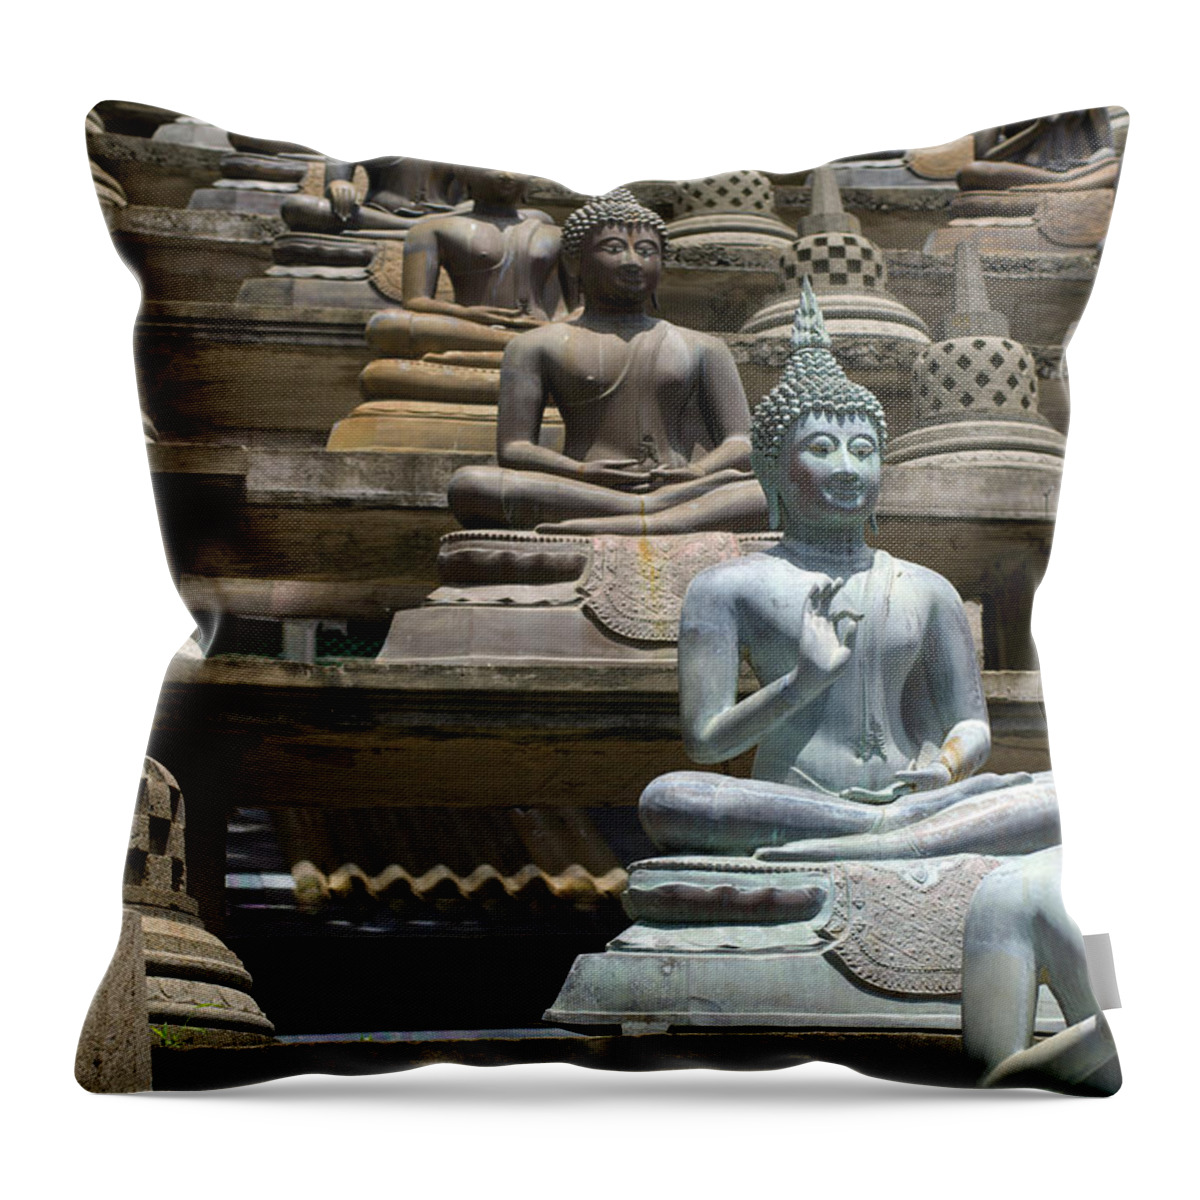 Statue Throw Pillow featuring the photograph Buddhist Statues by Tanukiphoto